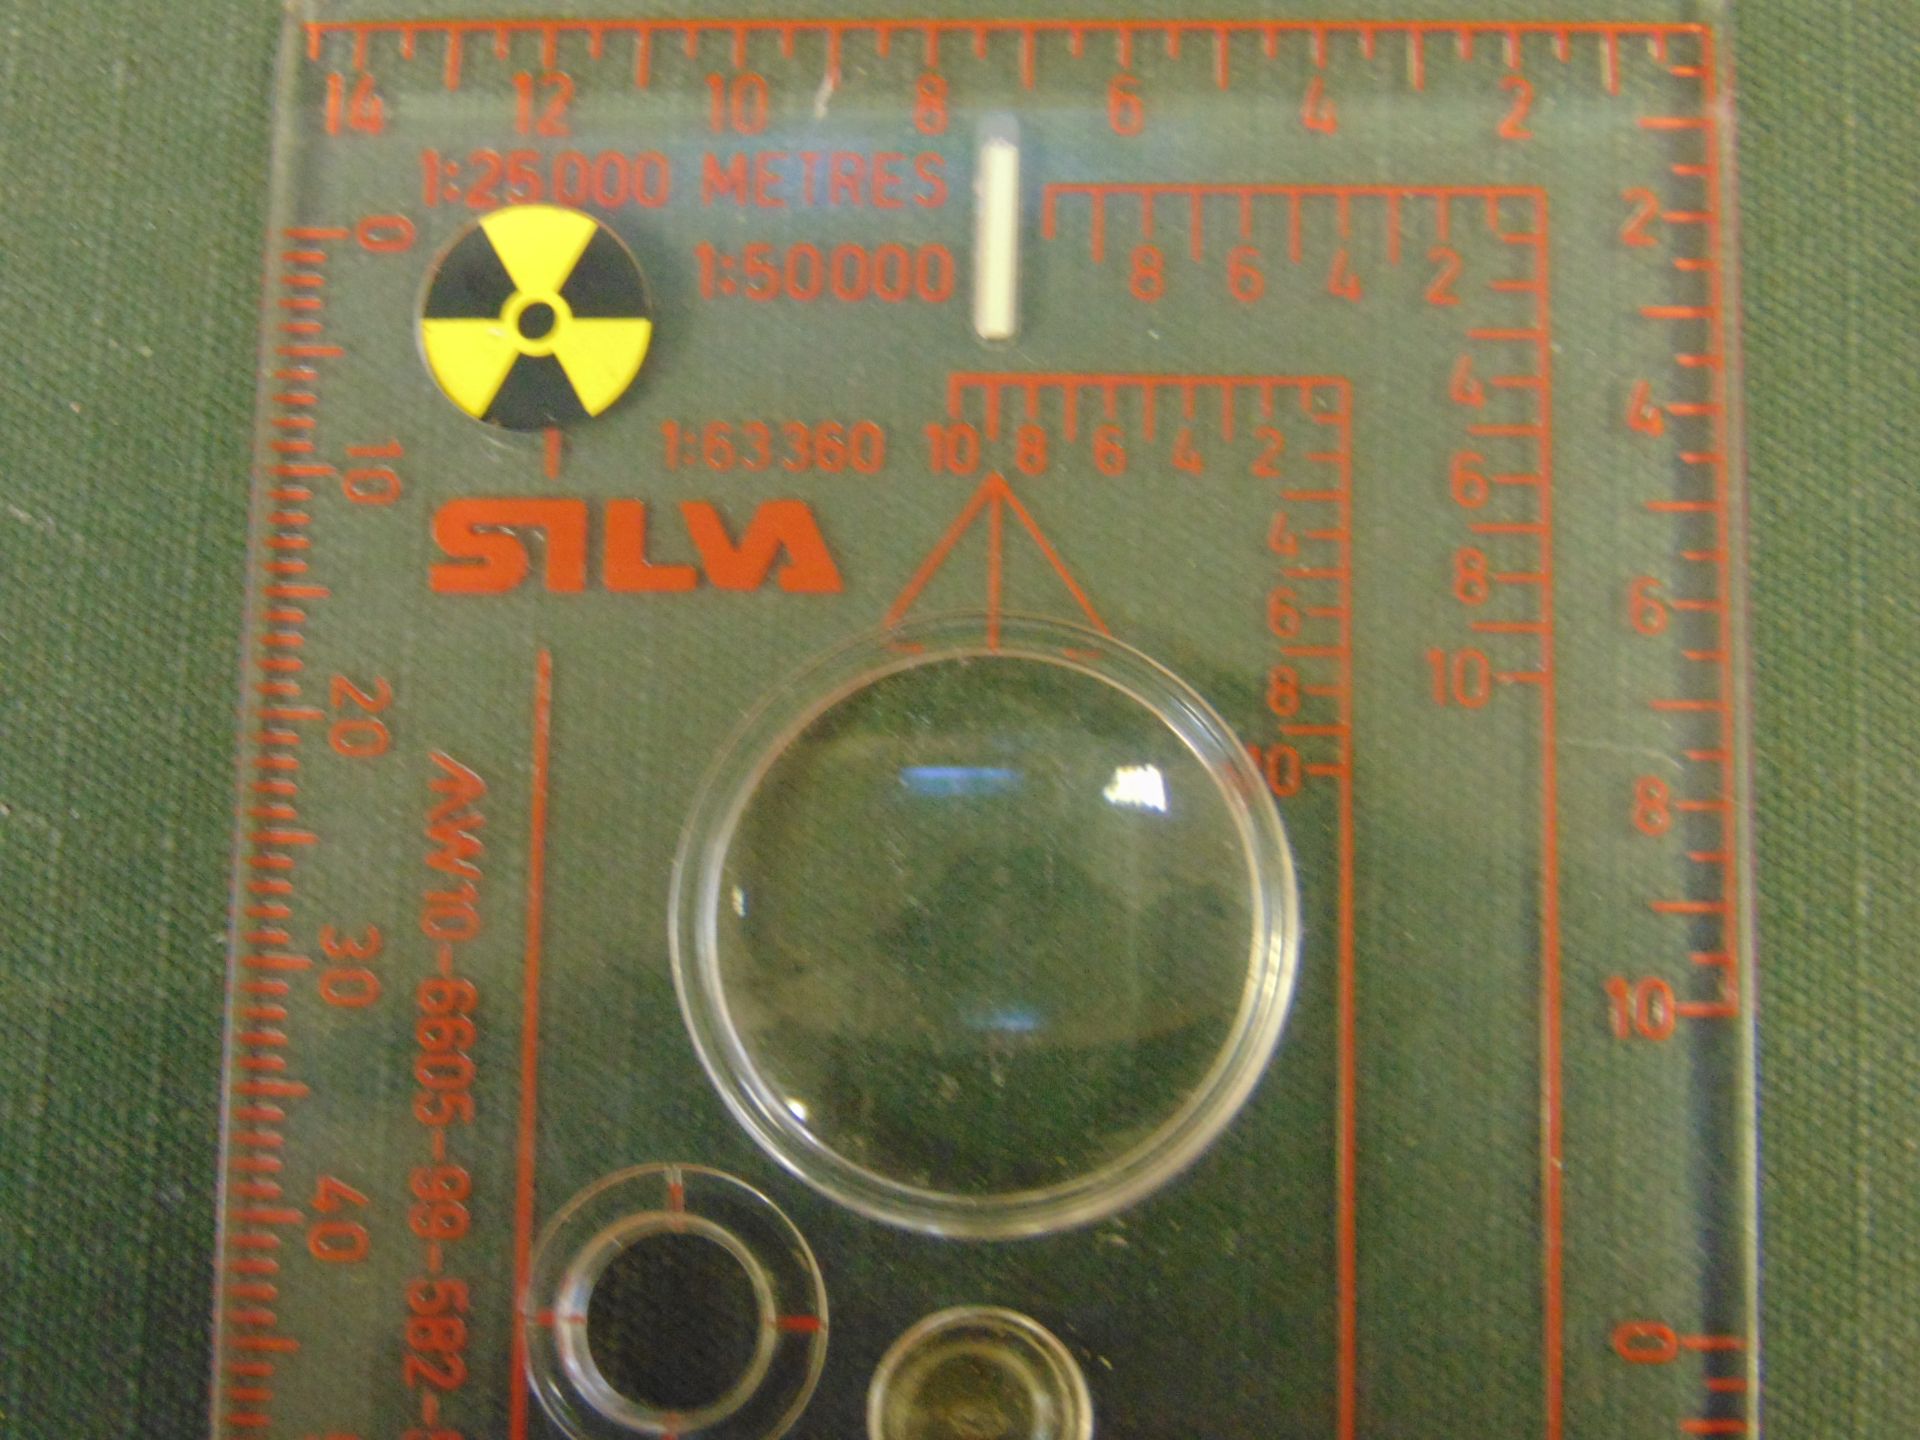 12x SILVA MAP READING COMPASS - Image 5 of 6